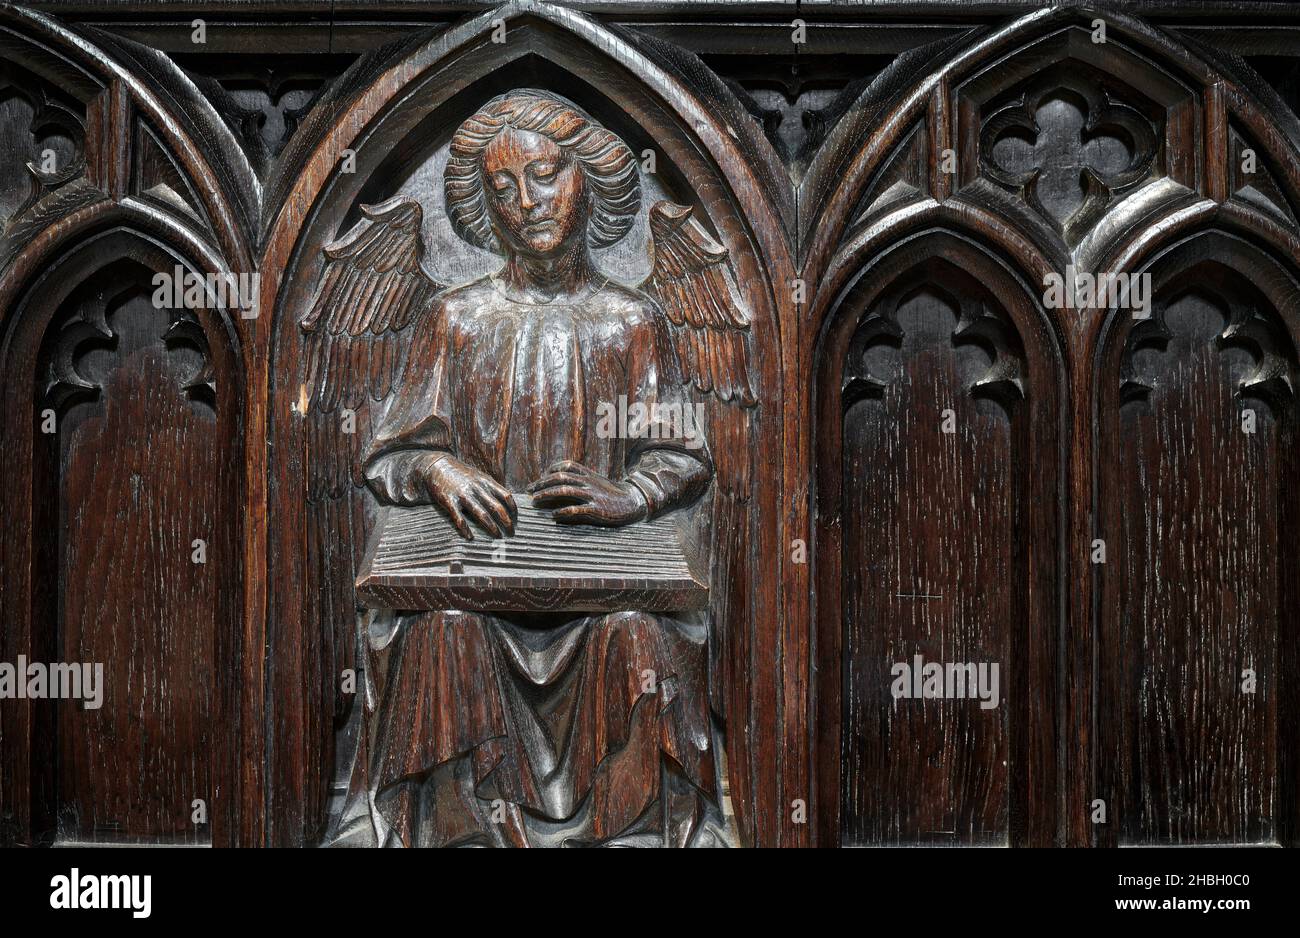 Carving of an angel with a musical instrument on the wooden bench in the choir at the cathedral of Lincoln, England. Stock Photo